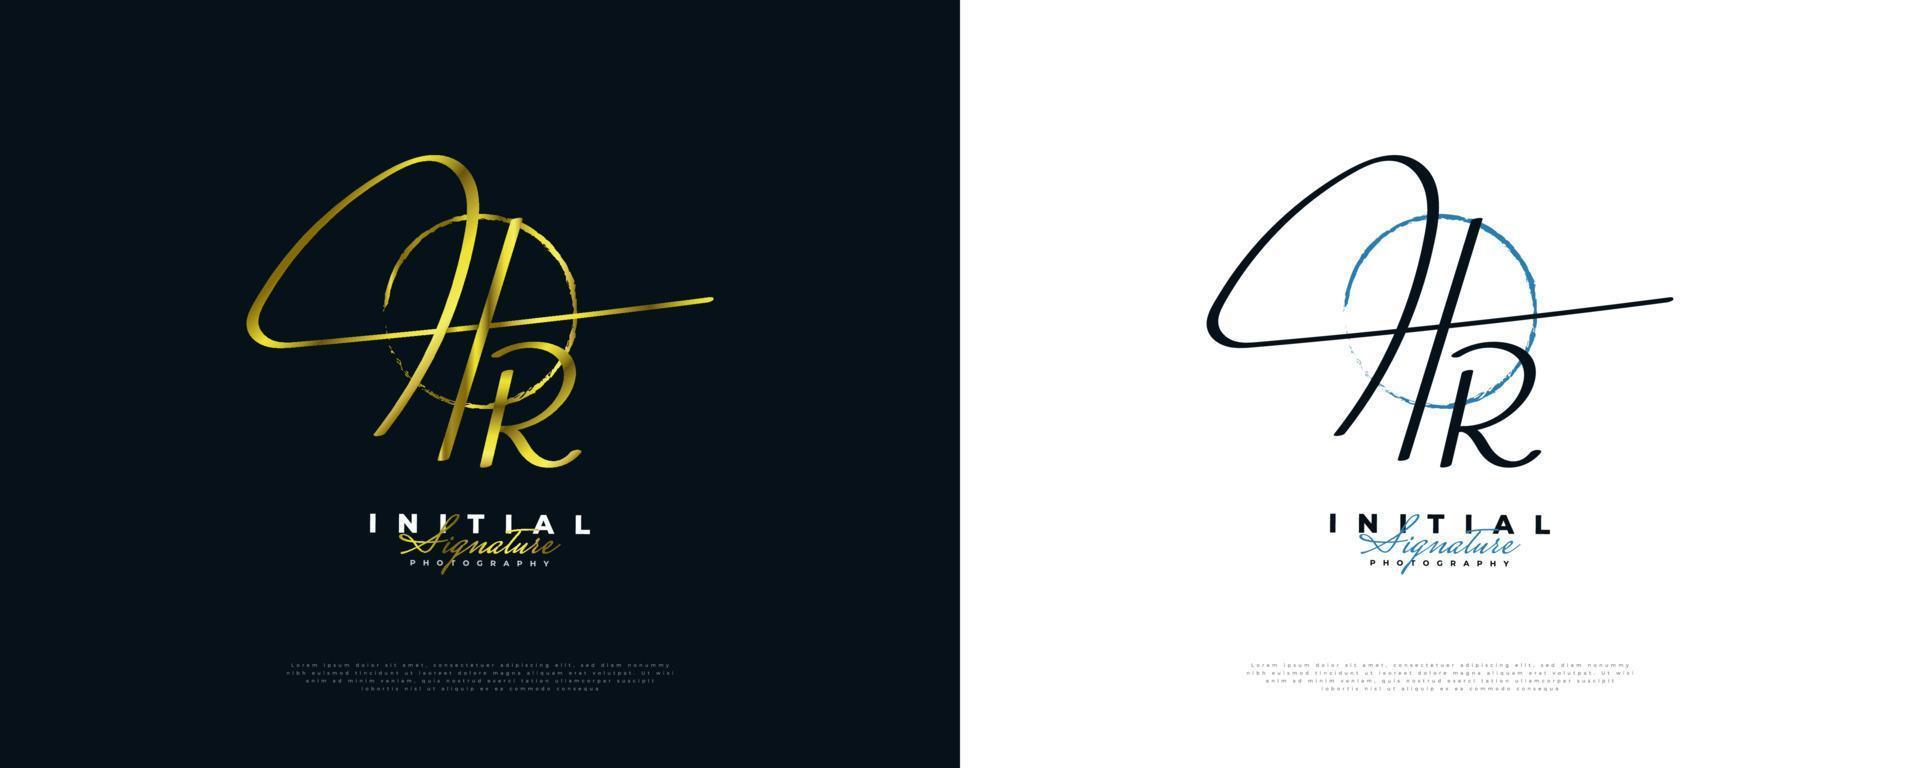 HR Initial Signature Logo Design in Gold Handwriting Style. Initial H and R Logo Design for Wedding, Fashion, Jewelry, Boutique and Business Brand Identity vector